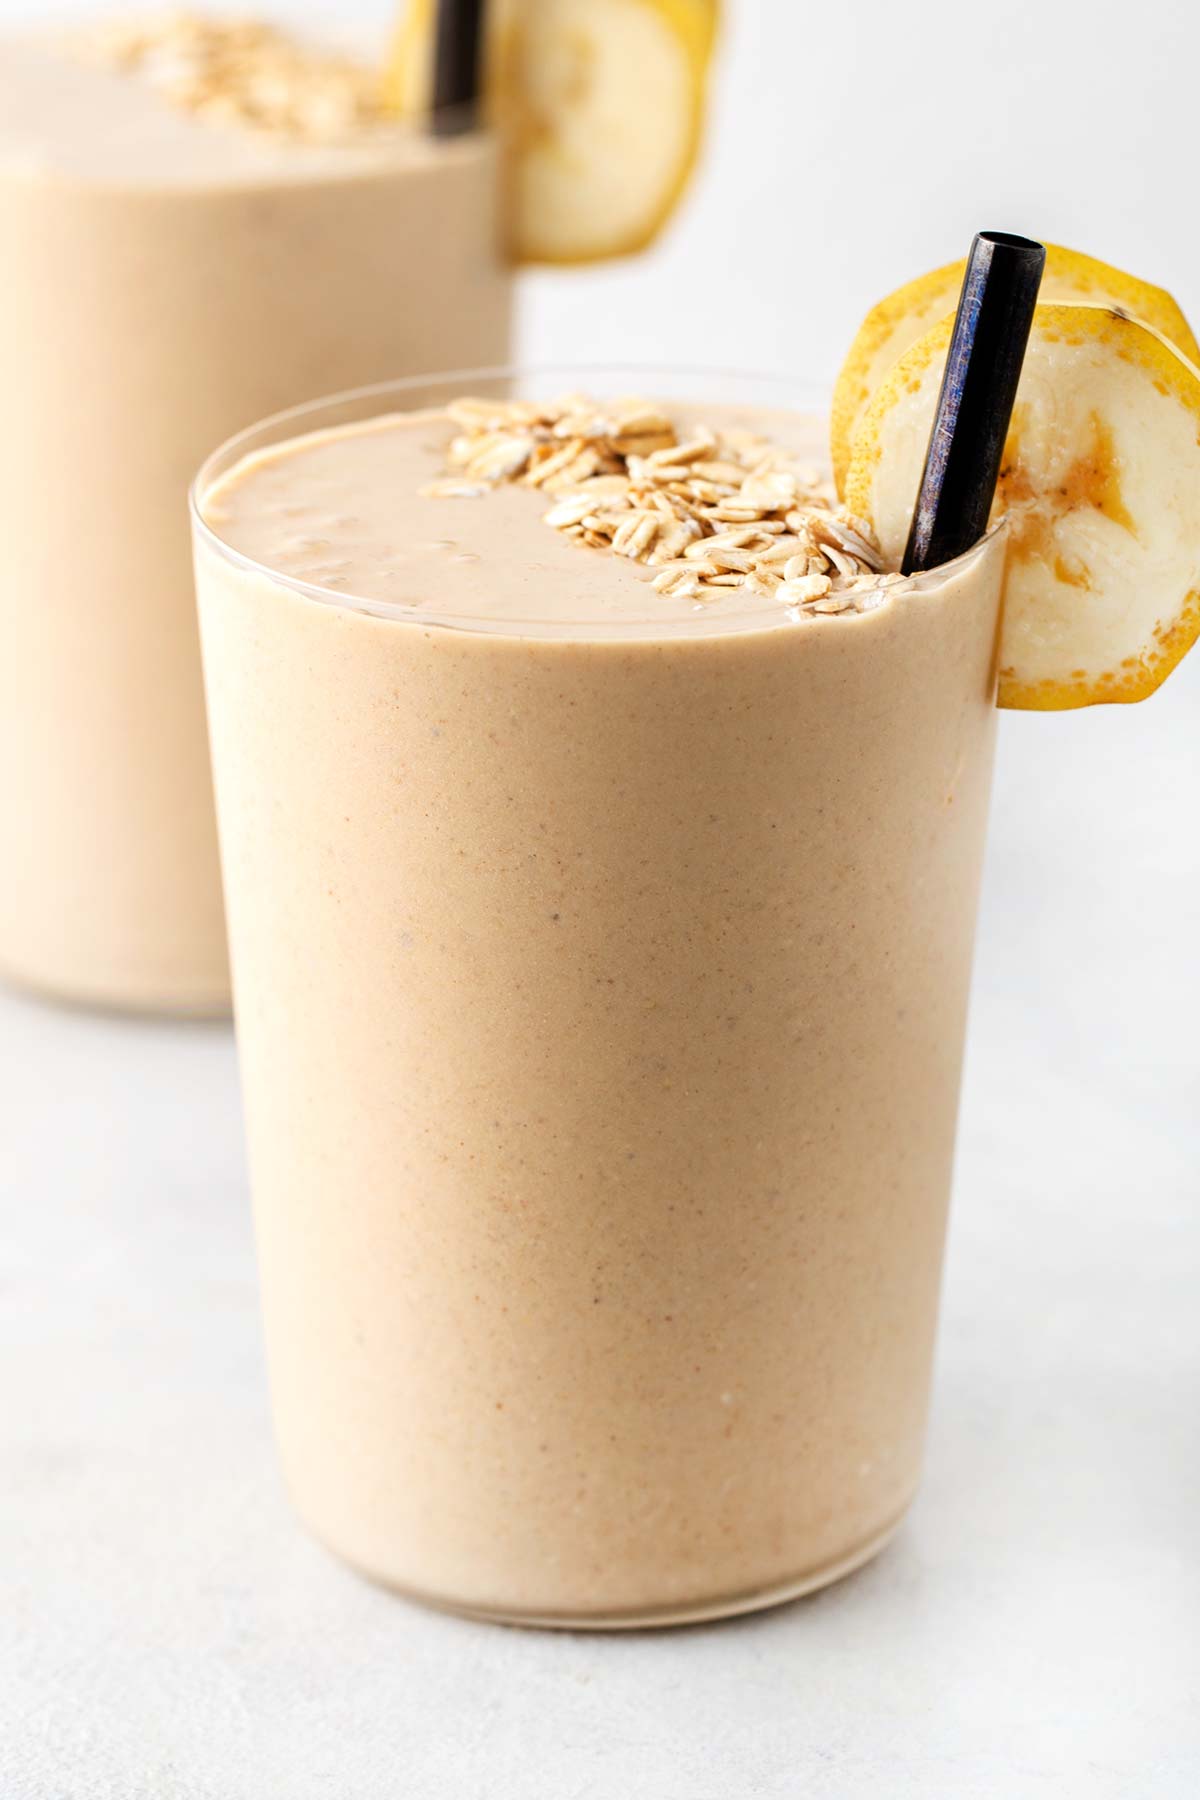 Peanut butter oatmeal smoothie in a glass.